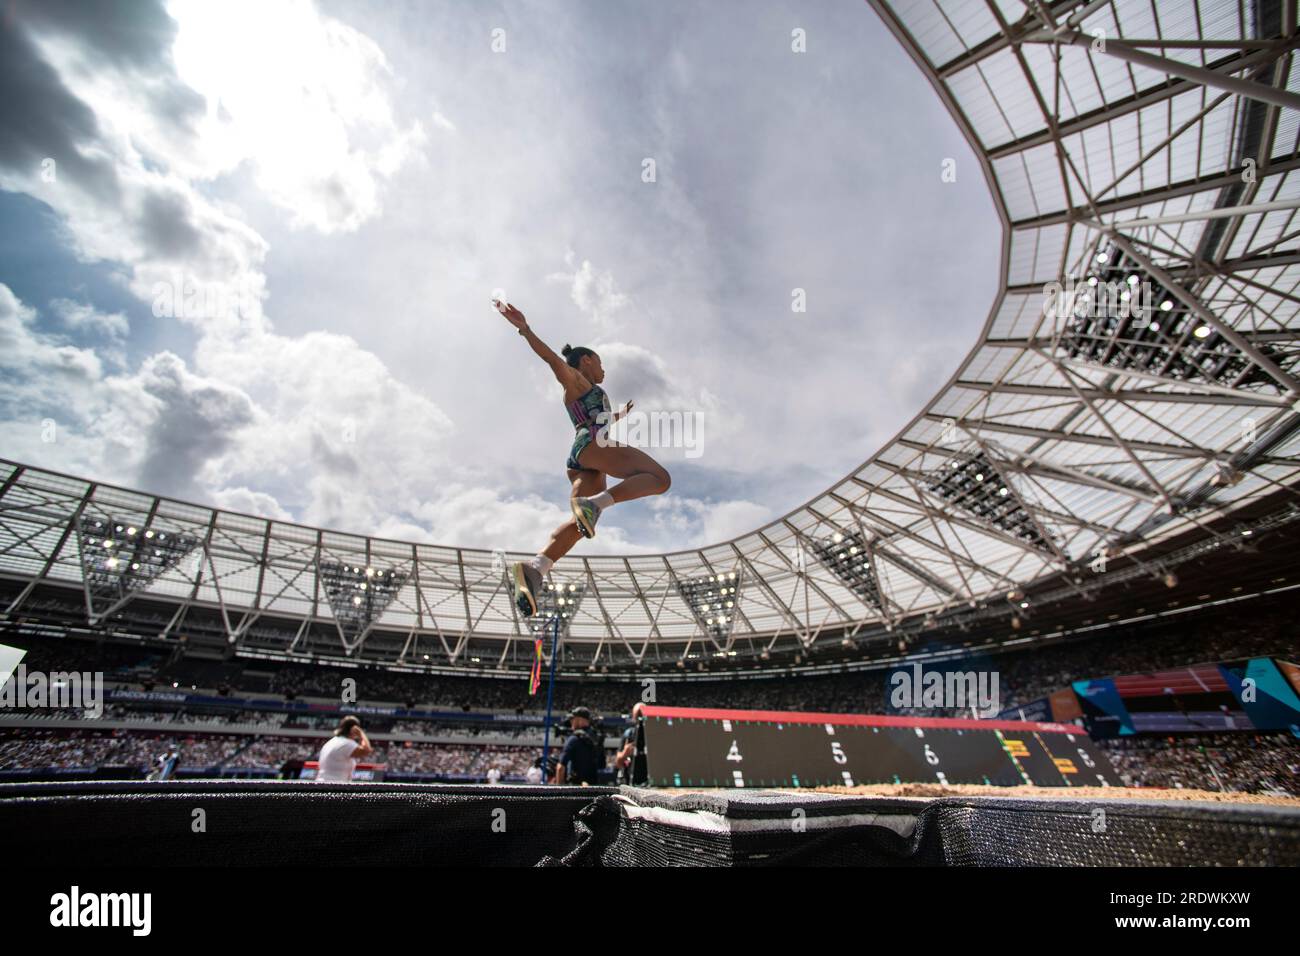 London, UK. 23rd July, 2023. Jazmin Sawyers of Great Britain & NI competiing in the women's long jump at the Wanda Diamond League London Event, London Stadium on the 23rd July 2023. Photo by Gary Mitchell/Alamy Live News Stock Photo